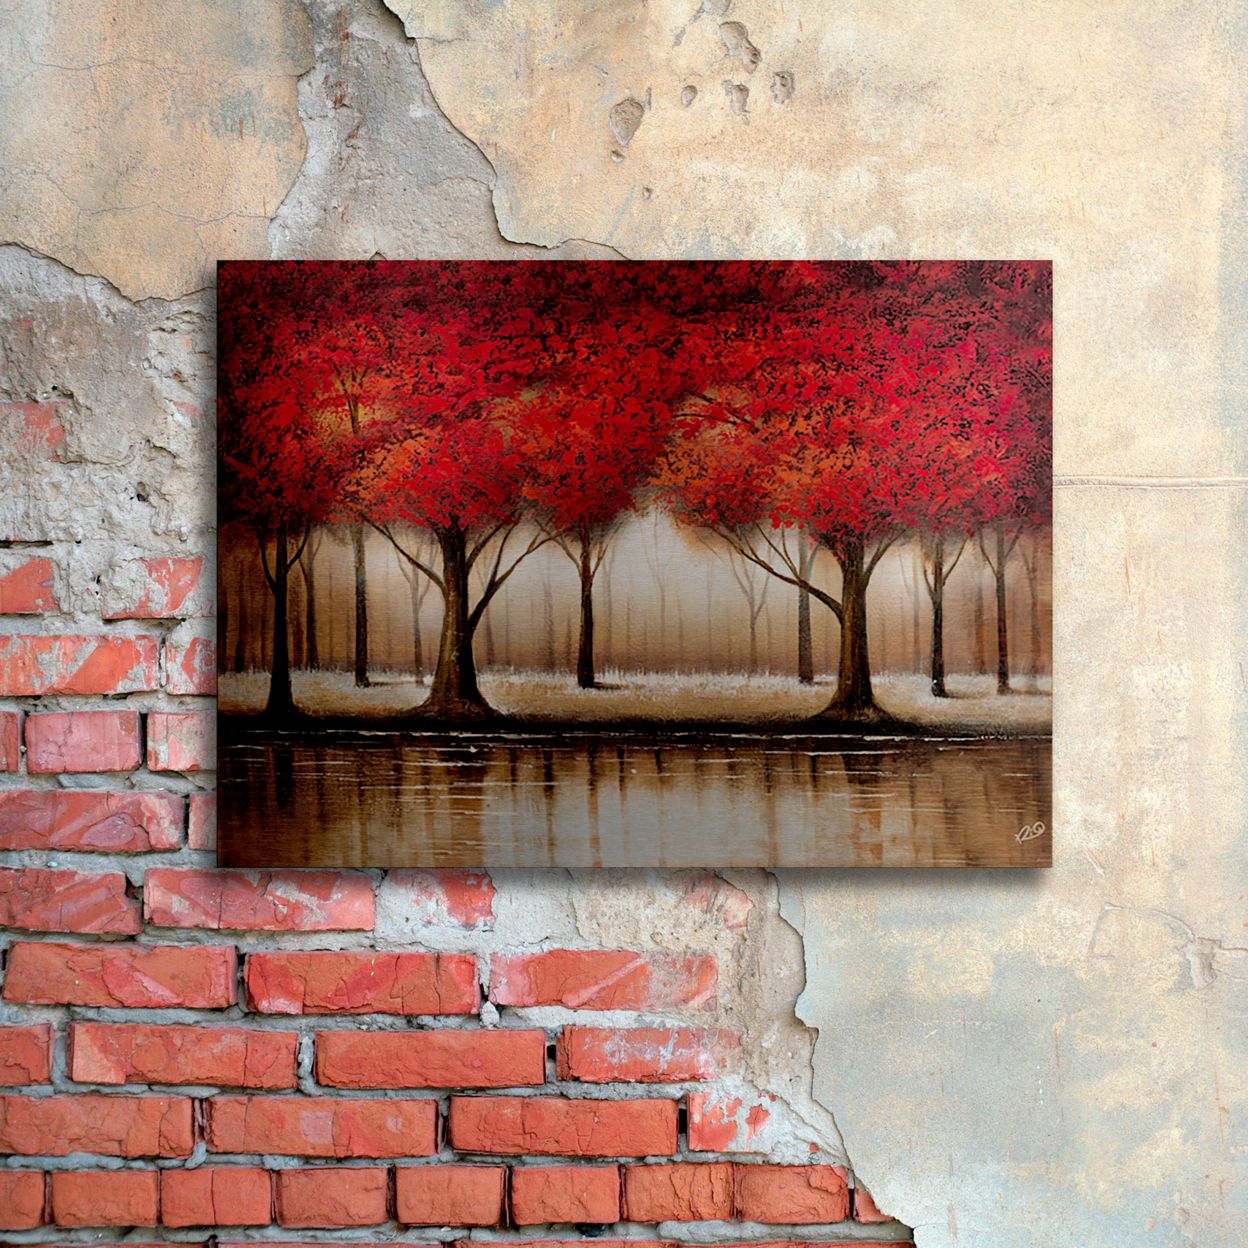 Rio 'Parade Of Red Trees' Floating Brushed Aluminum Art 16 X 22